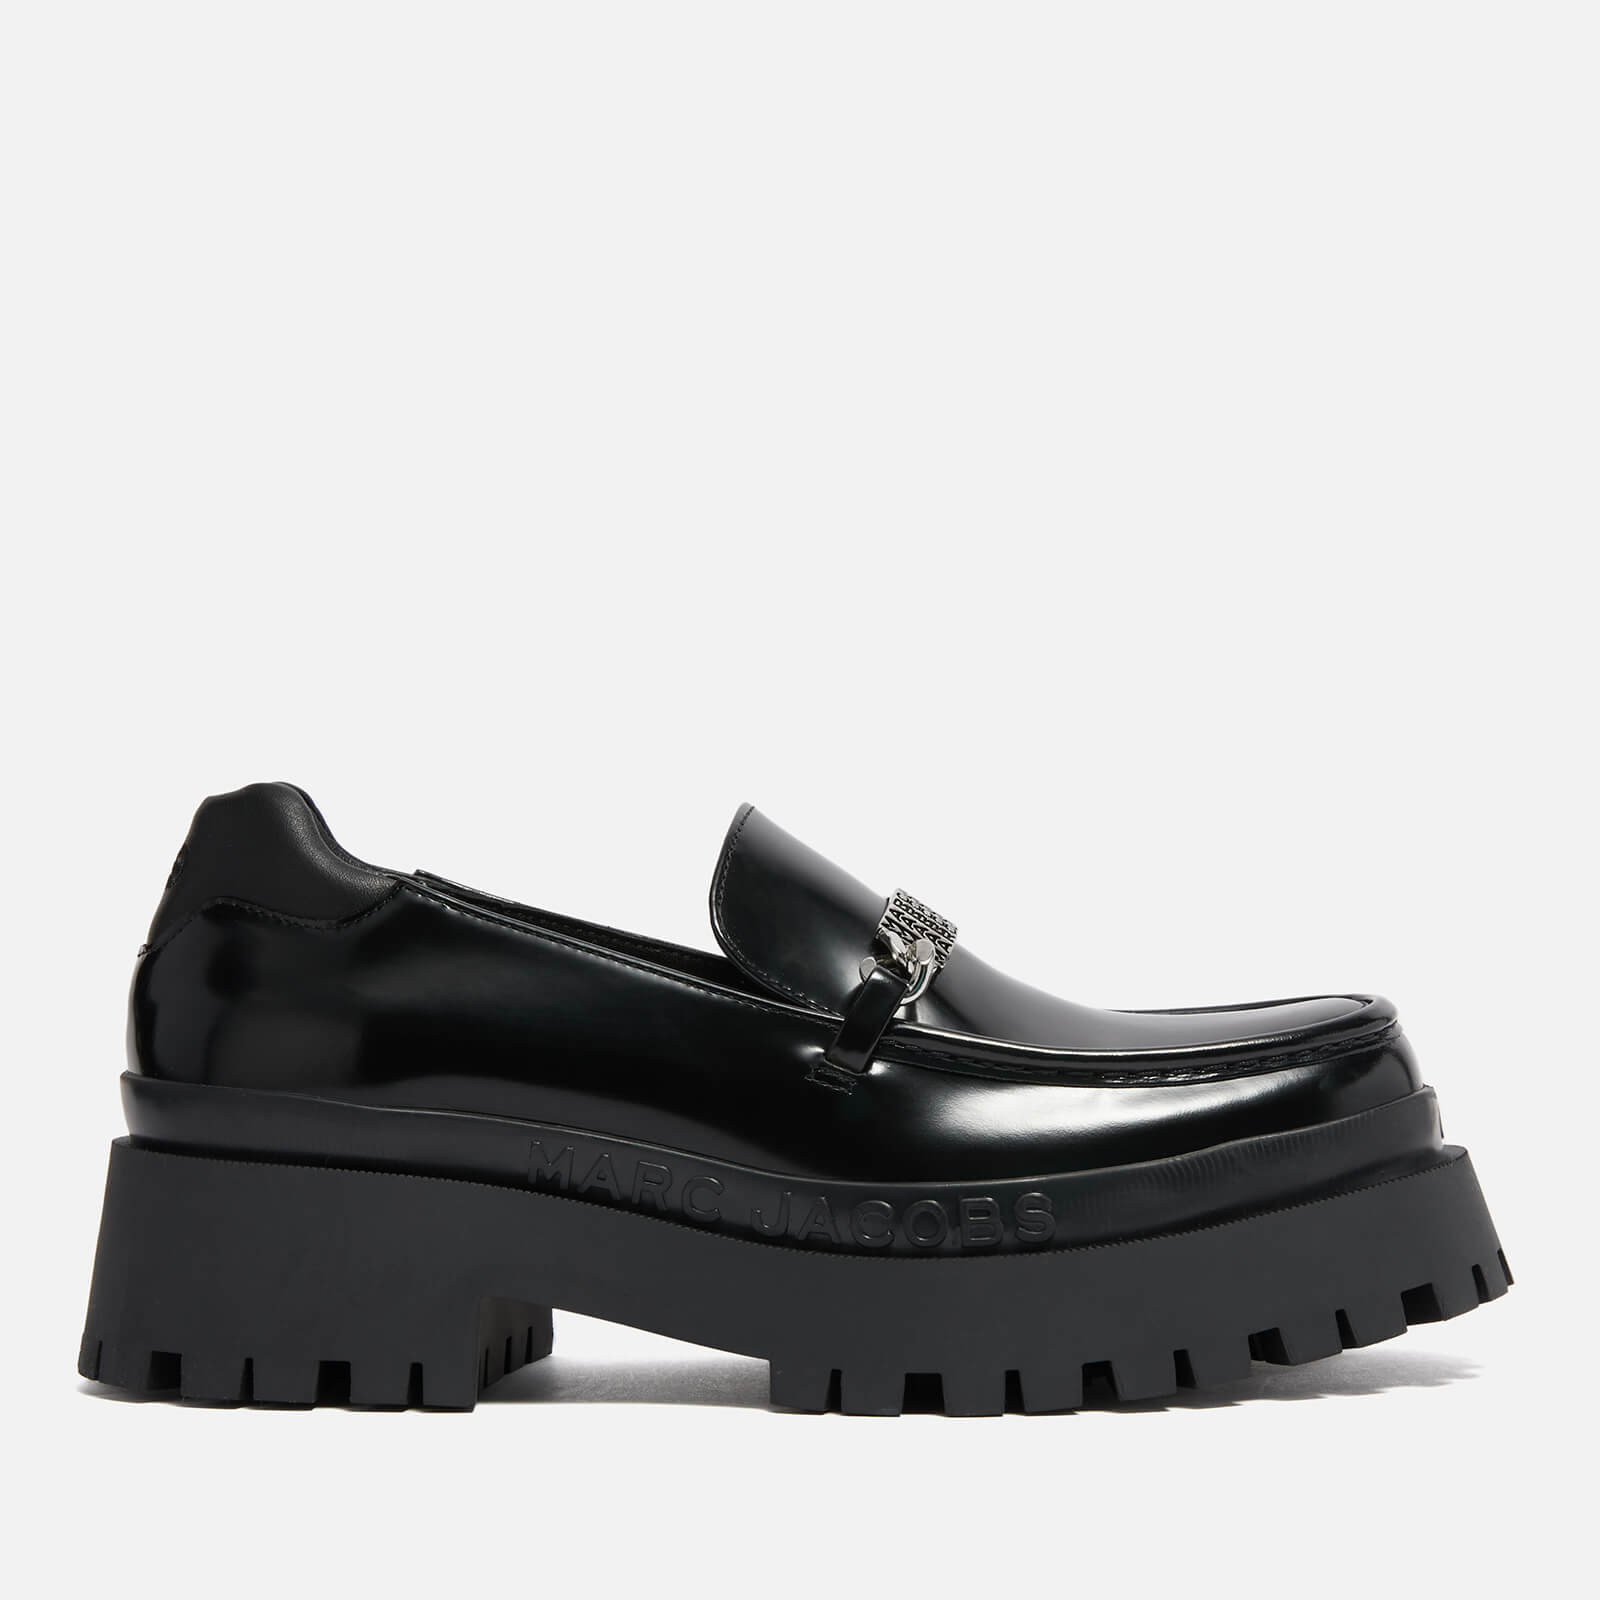 marc jacobs women's leather the loafer - eu 37/uk 4